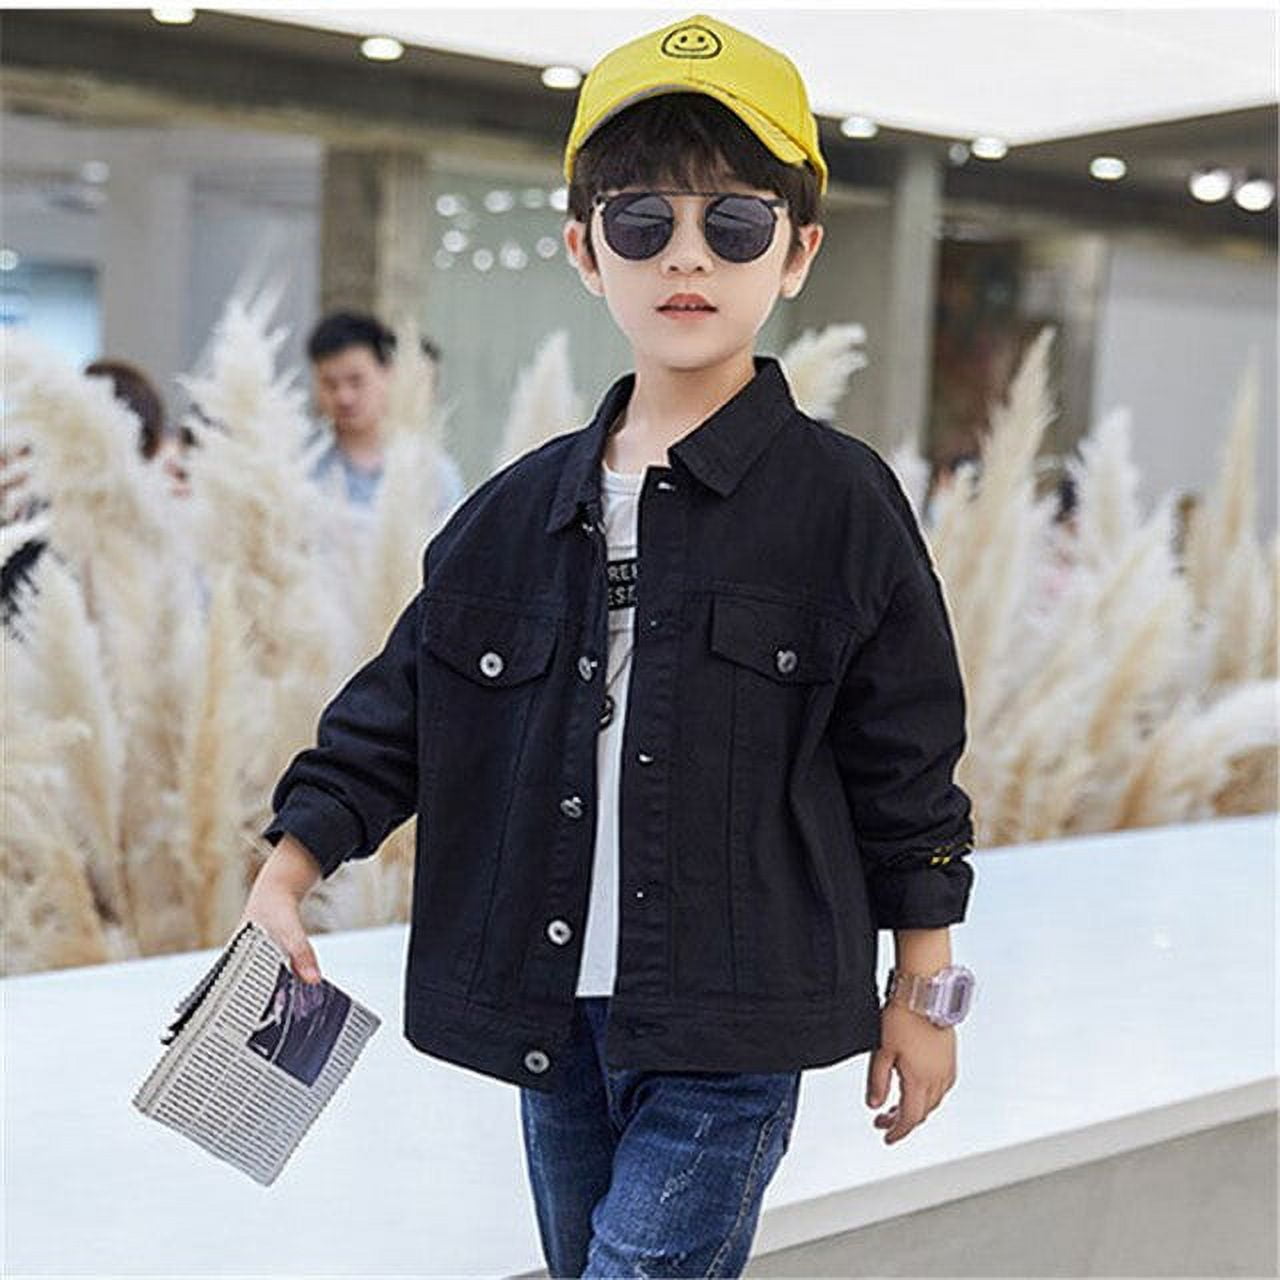 Kids Denim Shirt Suppliers 19160475 - Wholesale Manufacturers and Exporters